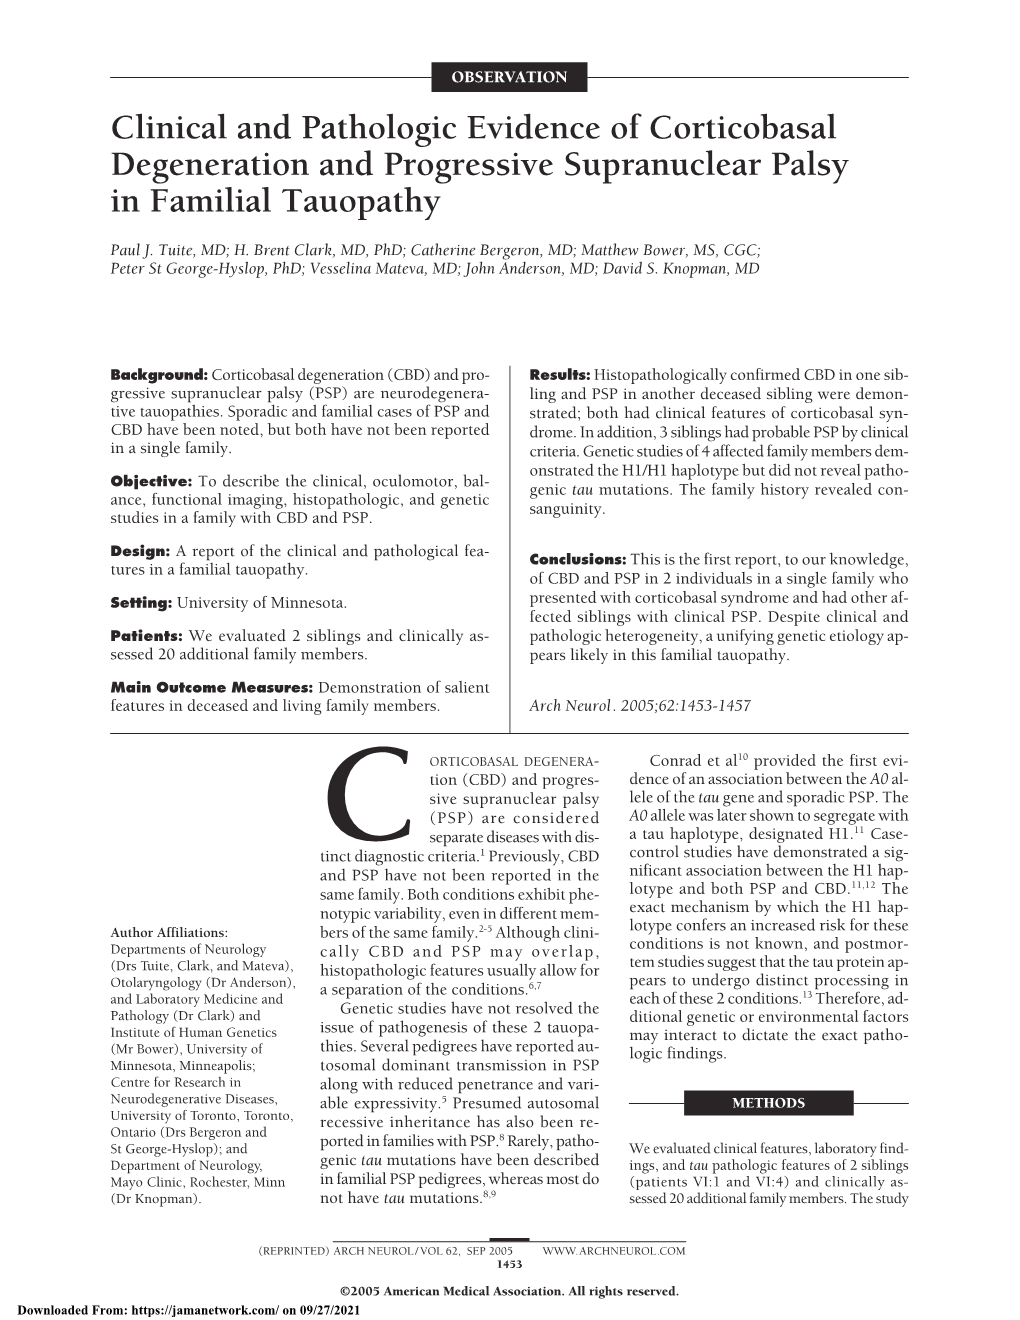 Clinical and Pathologic Evidence of Corticobasal Degeneration and Progressive Supranuclear Palsy in Familial Tauopathy